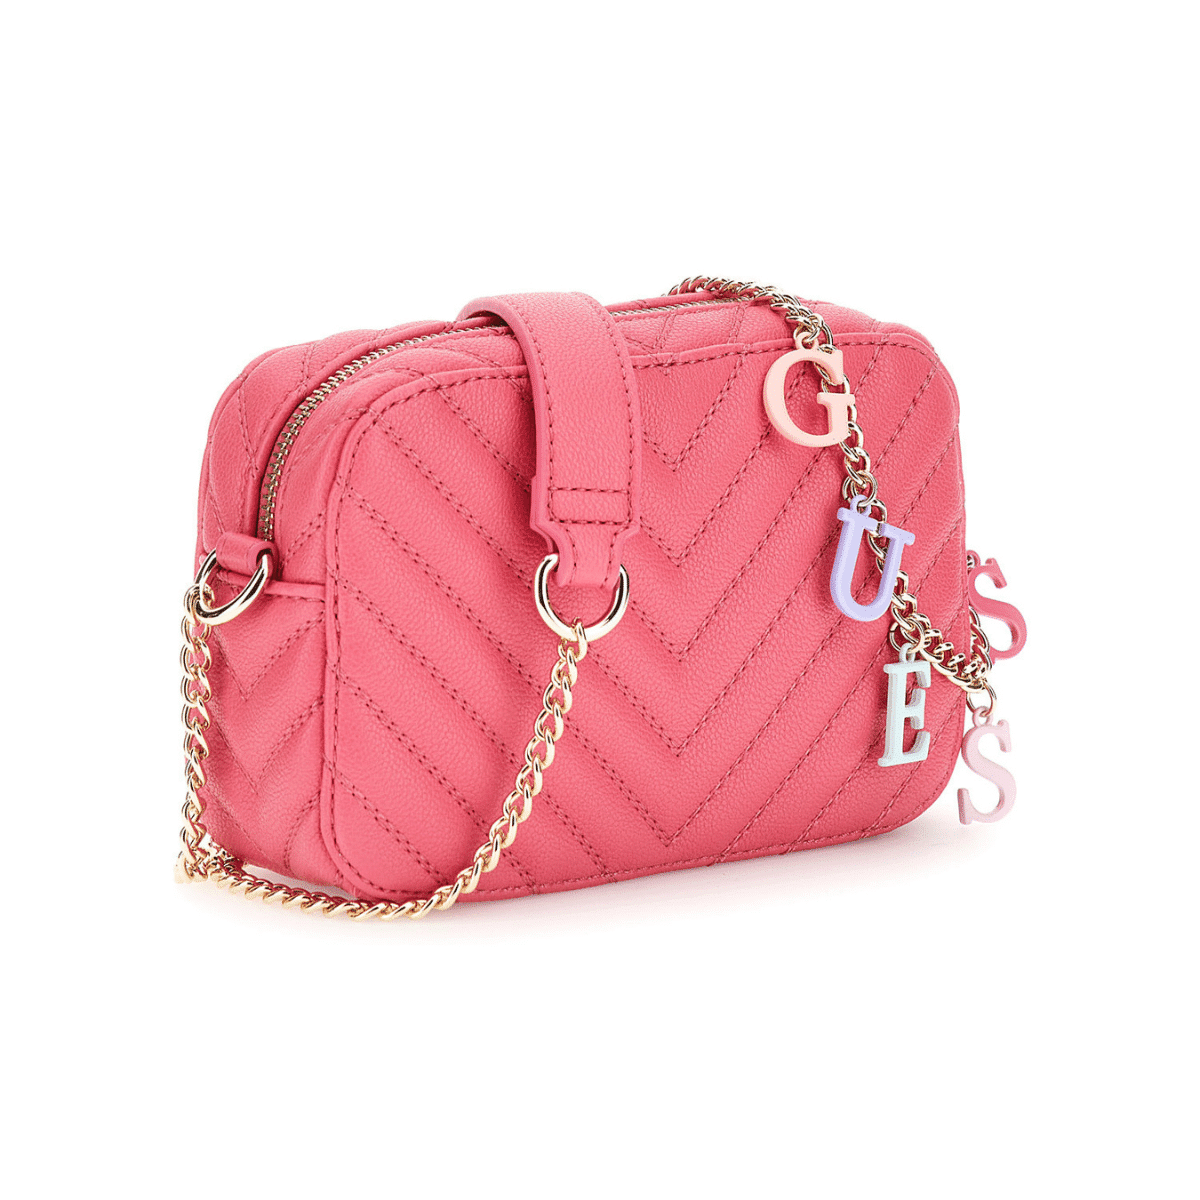 guess girl pink handbag with gold strap side view